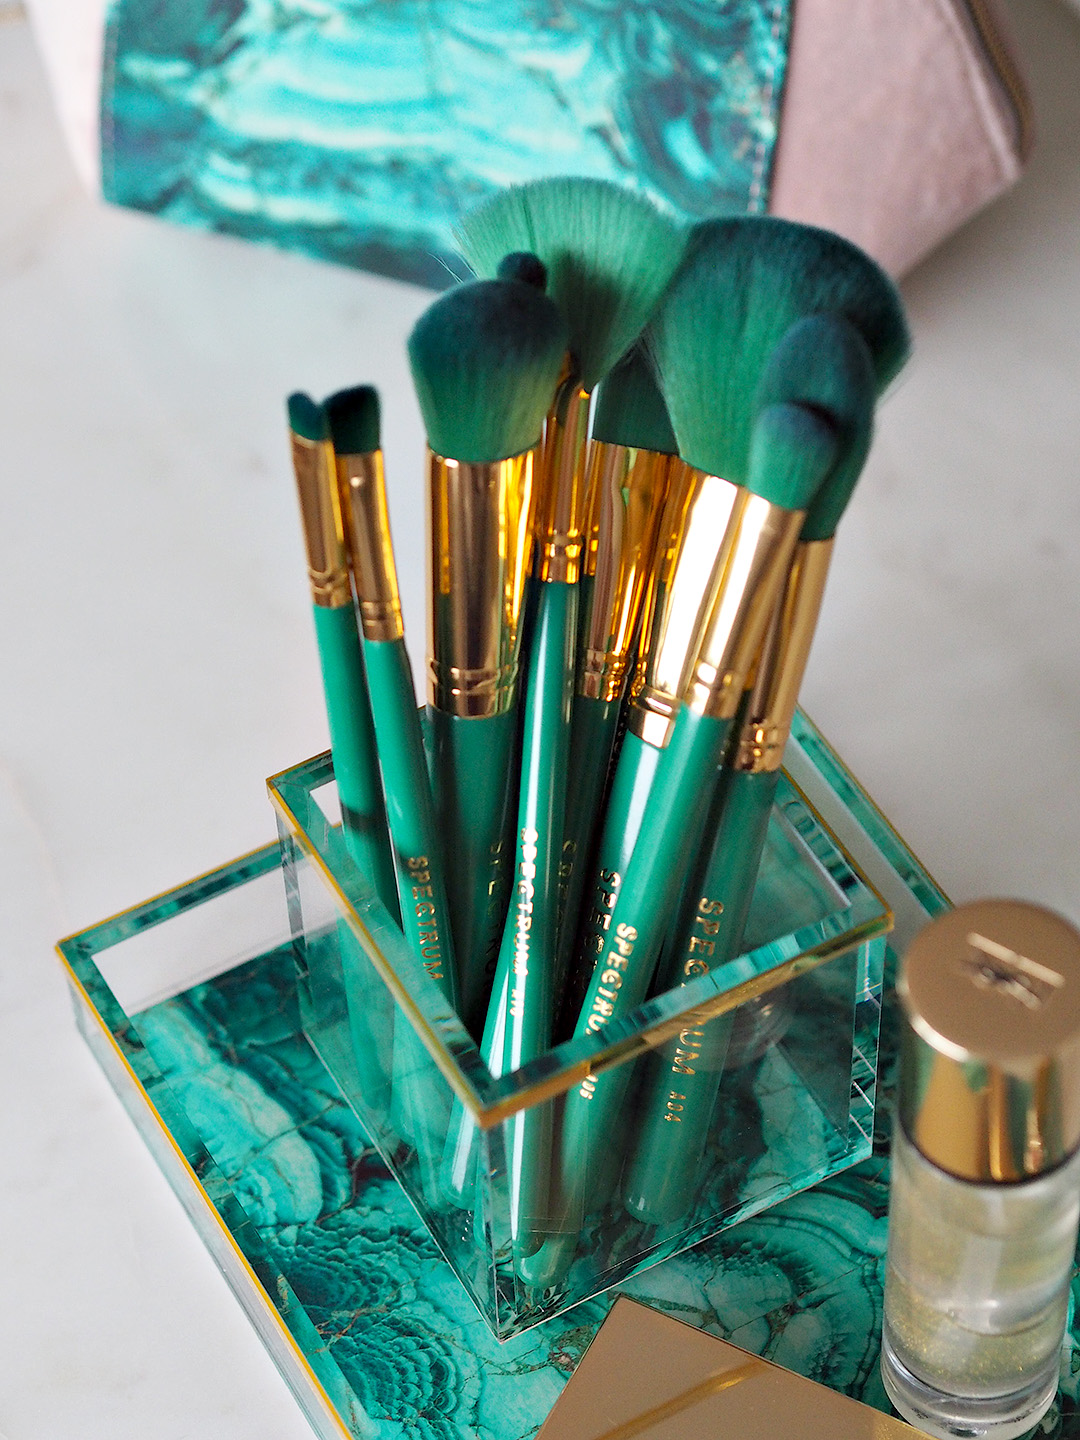 Spectrum Crystal Chic Makeup Brushes